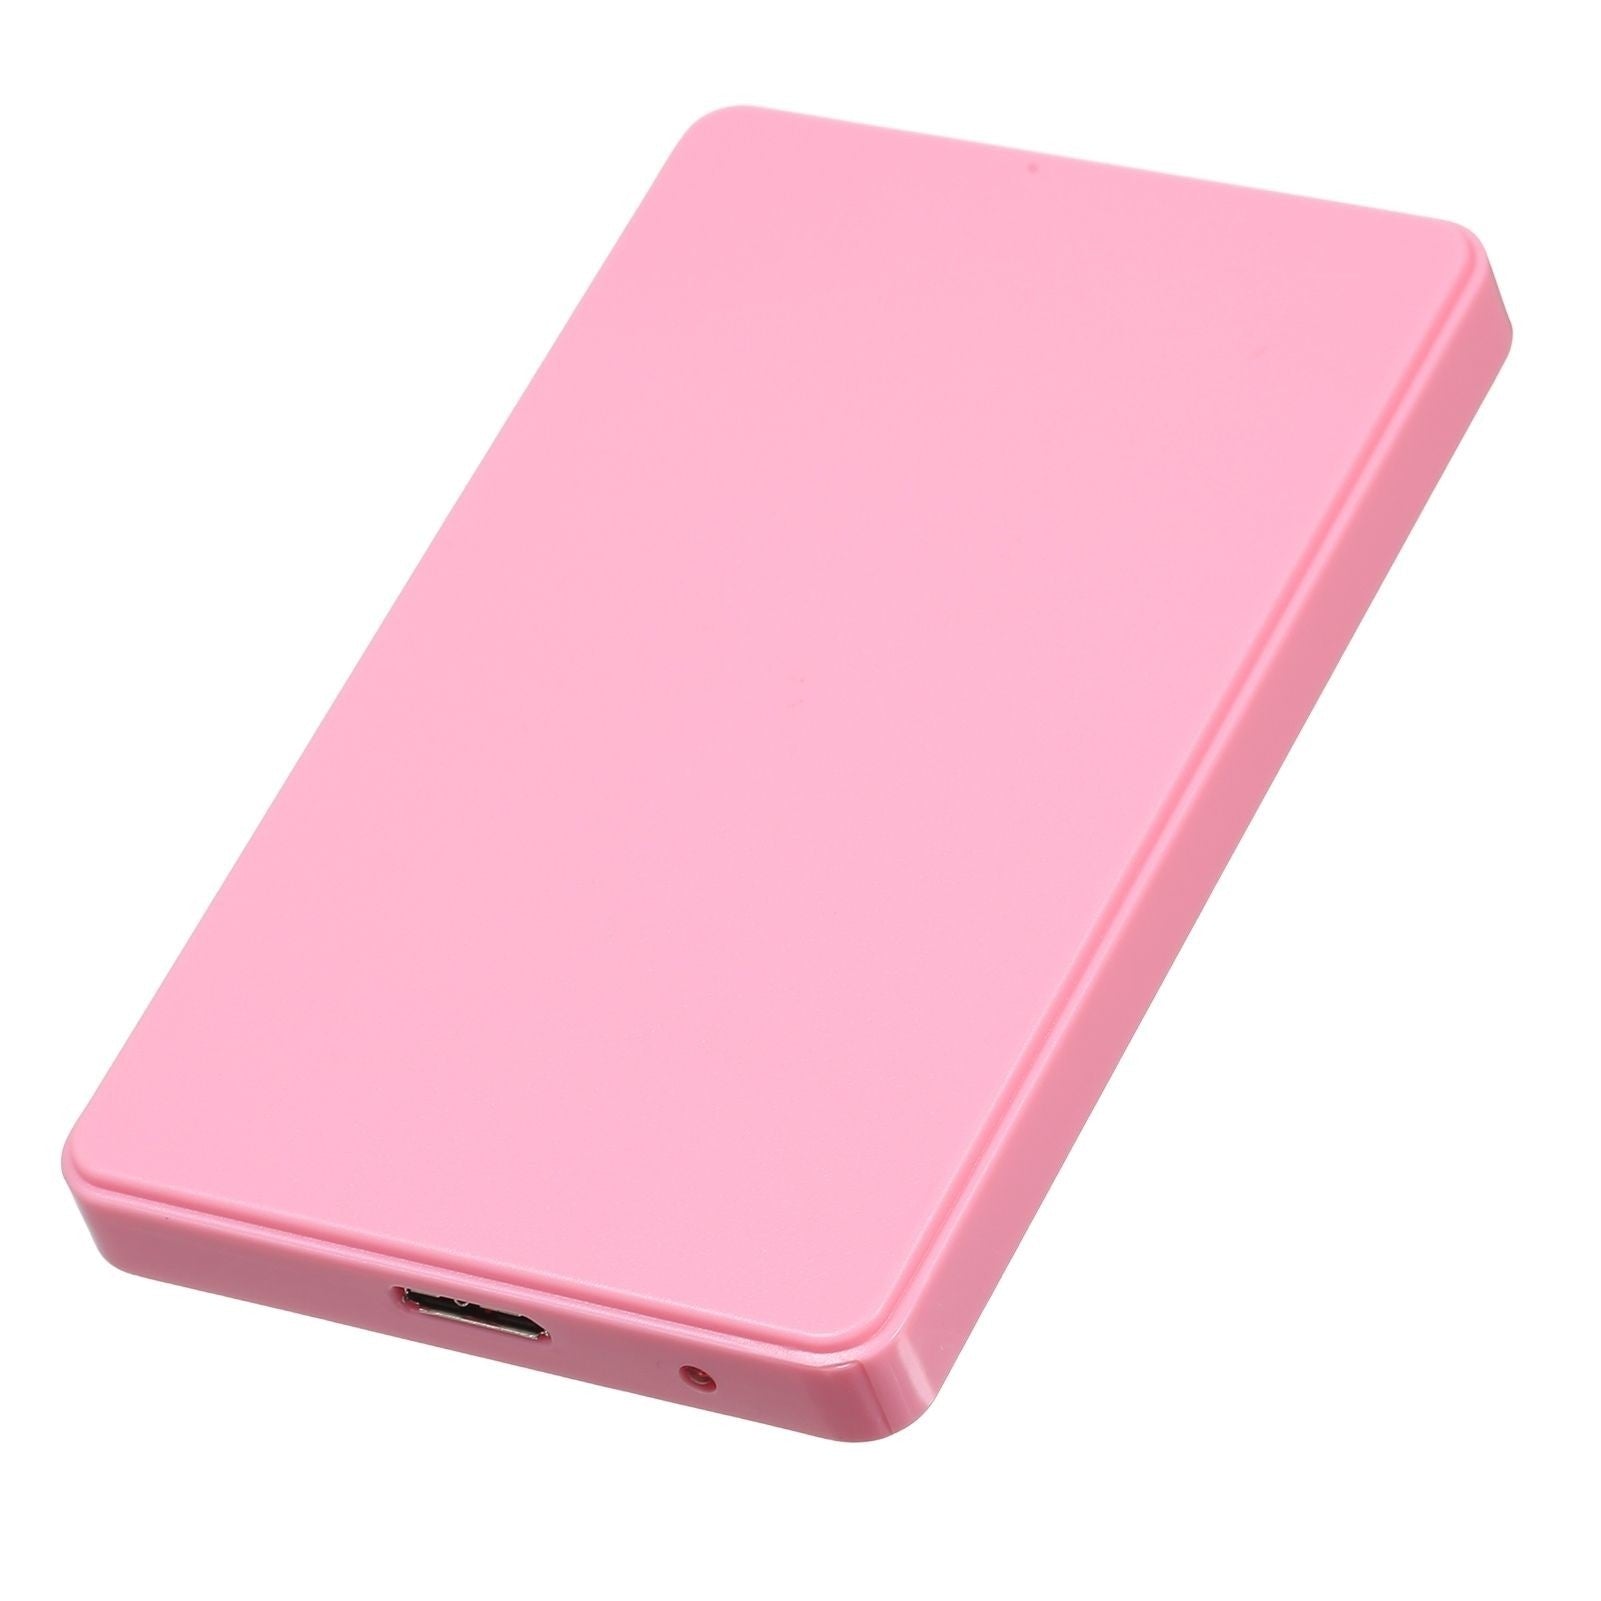 2.5 inch Hard Disk Case USB3.0 High-speed 5Gpbs Transmission External Enclosure SATA Hard Drive Case Support 2.5inch 7/9.5mm SATA HDD/SSD - Pink